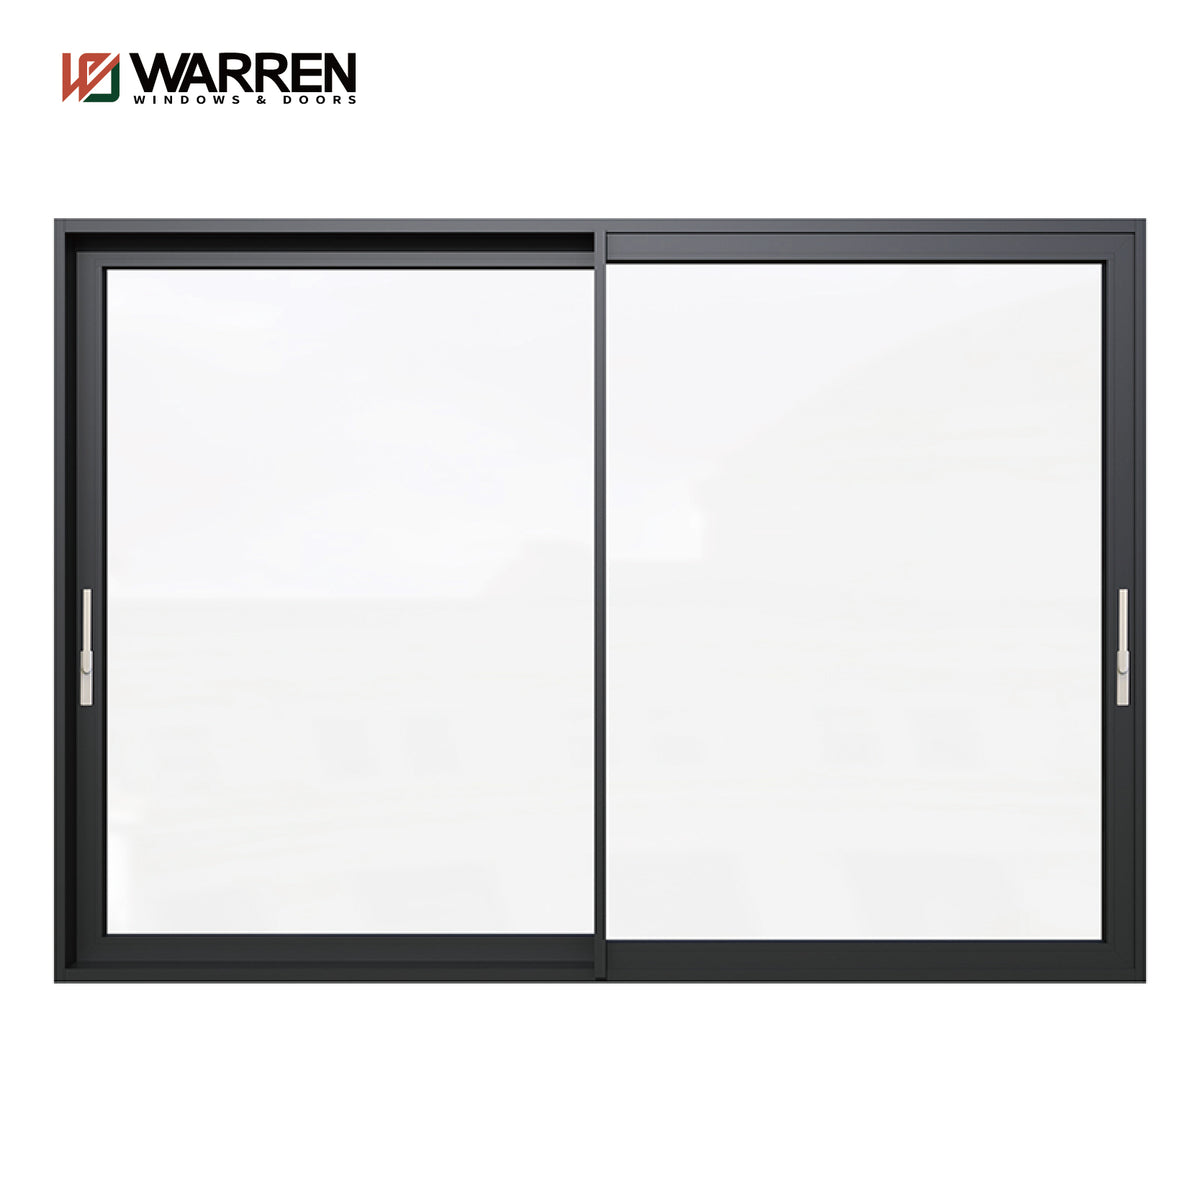 Customized China Doors Doubl Glass Aluminum Slide Door For Business And Home